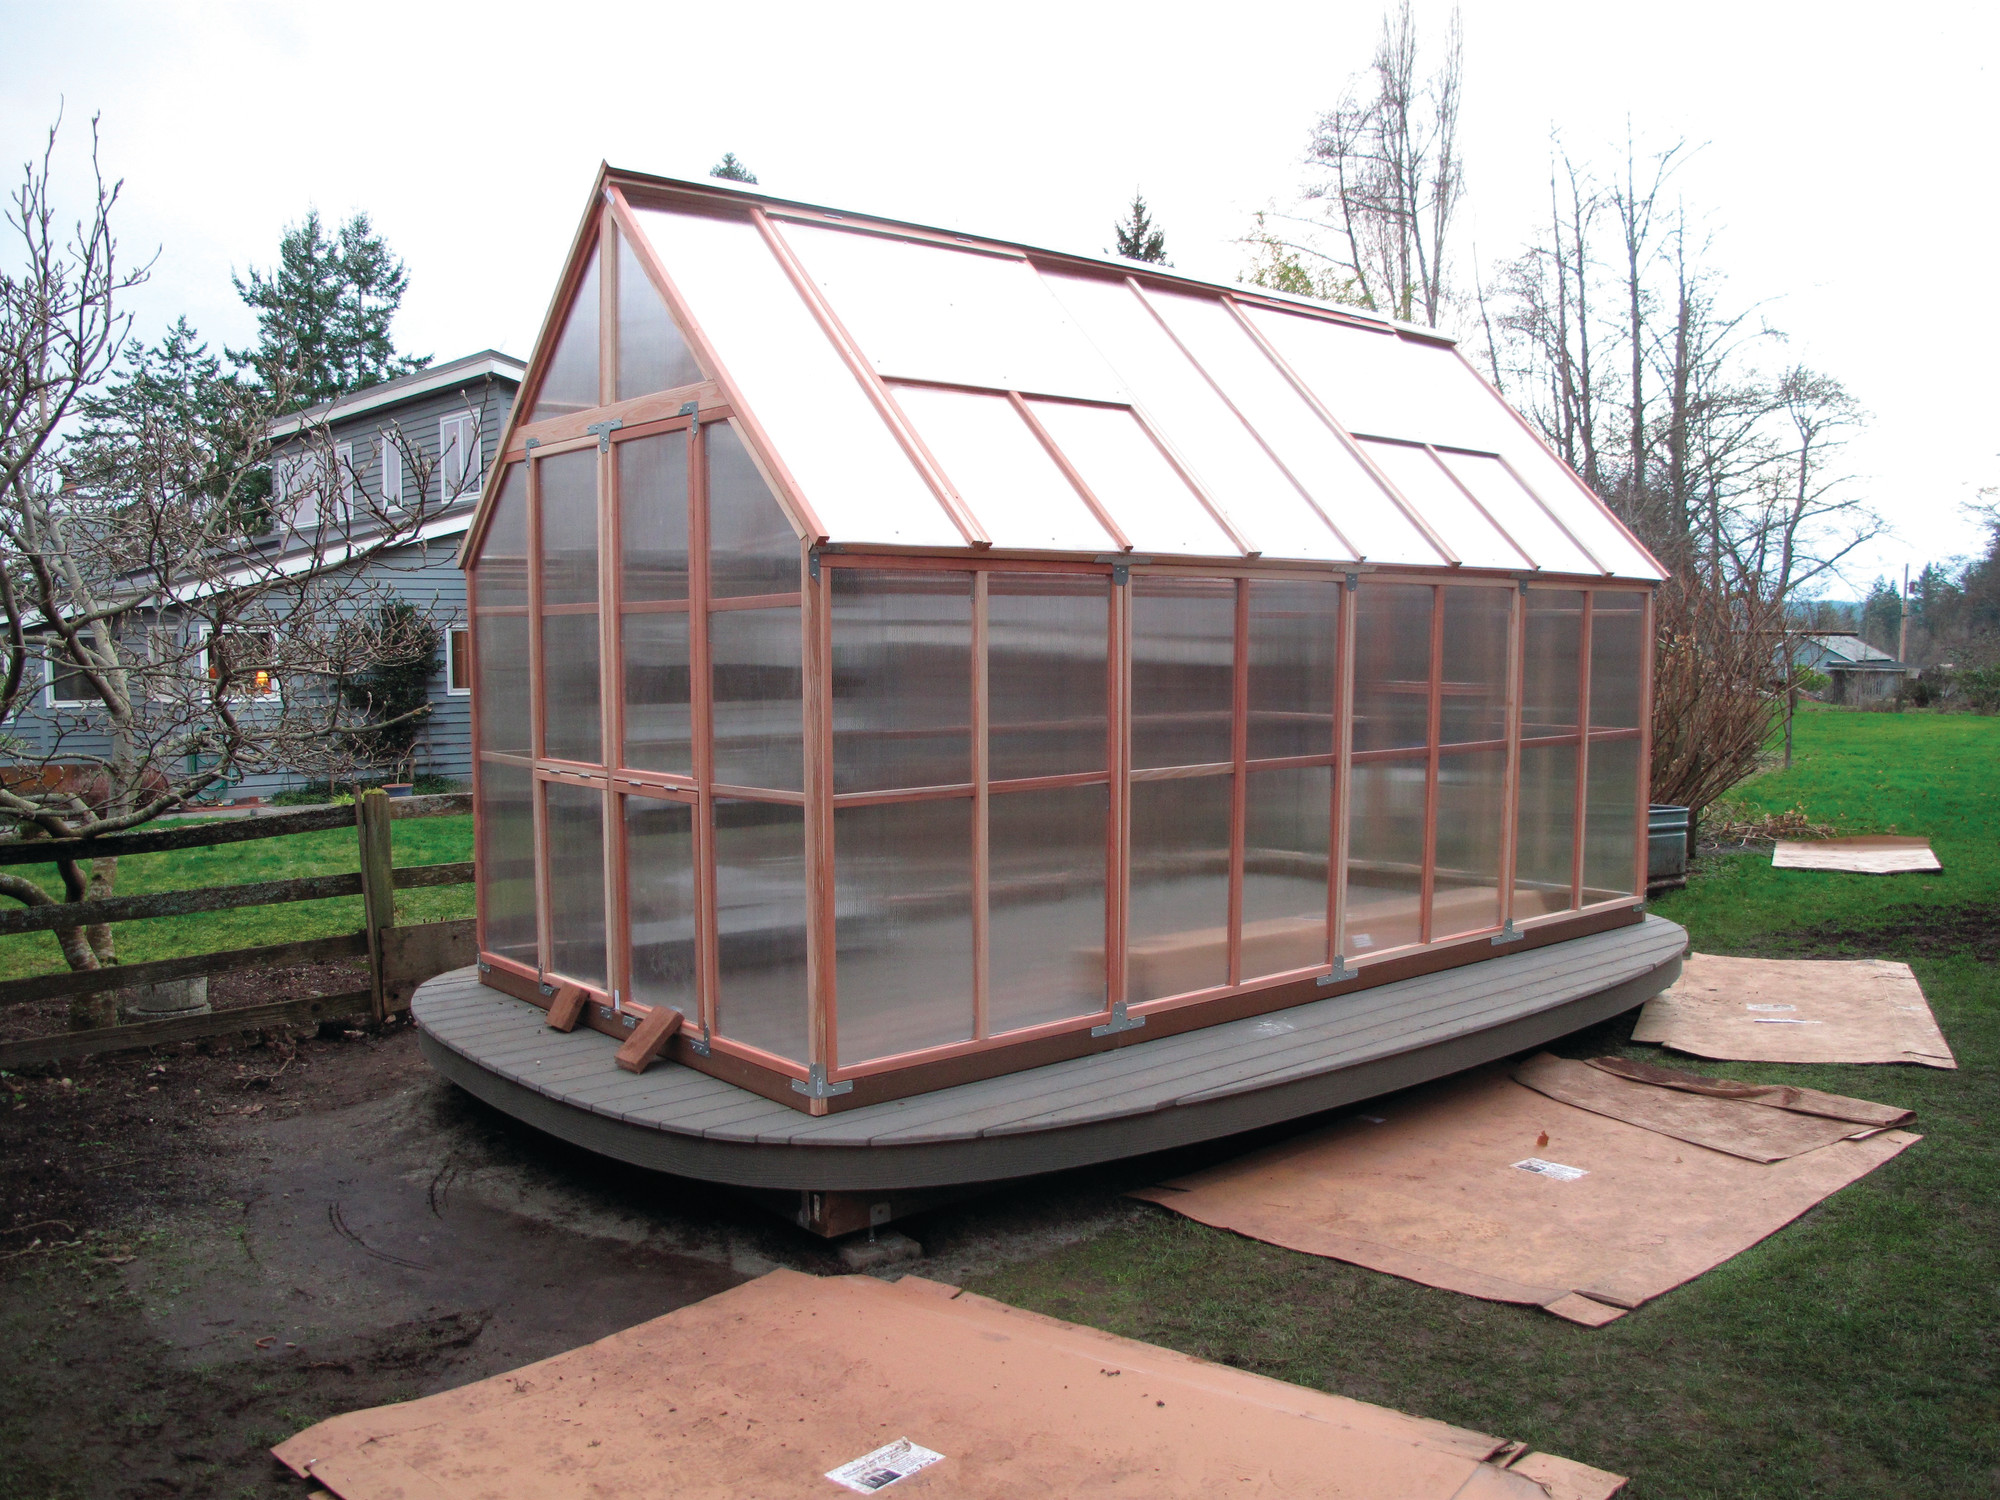 A hobby greenhouse is seen in February in Langley, Washington, built in a sunny location capable of capturing an immense amount of summertime heat. It was later equipped with a timed irrigation system that automatically turns on early in the morning to water a wide assortment of potted plants. Smart devices are being introduced to make gardening less demanding and more efficient.